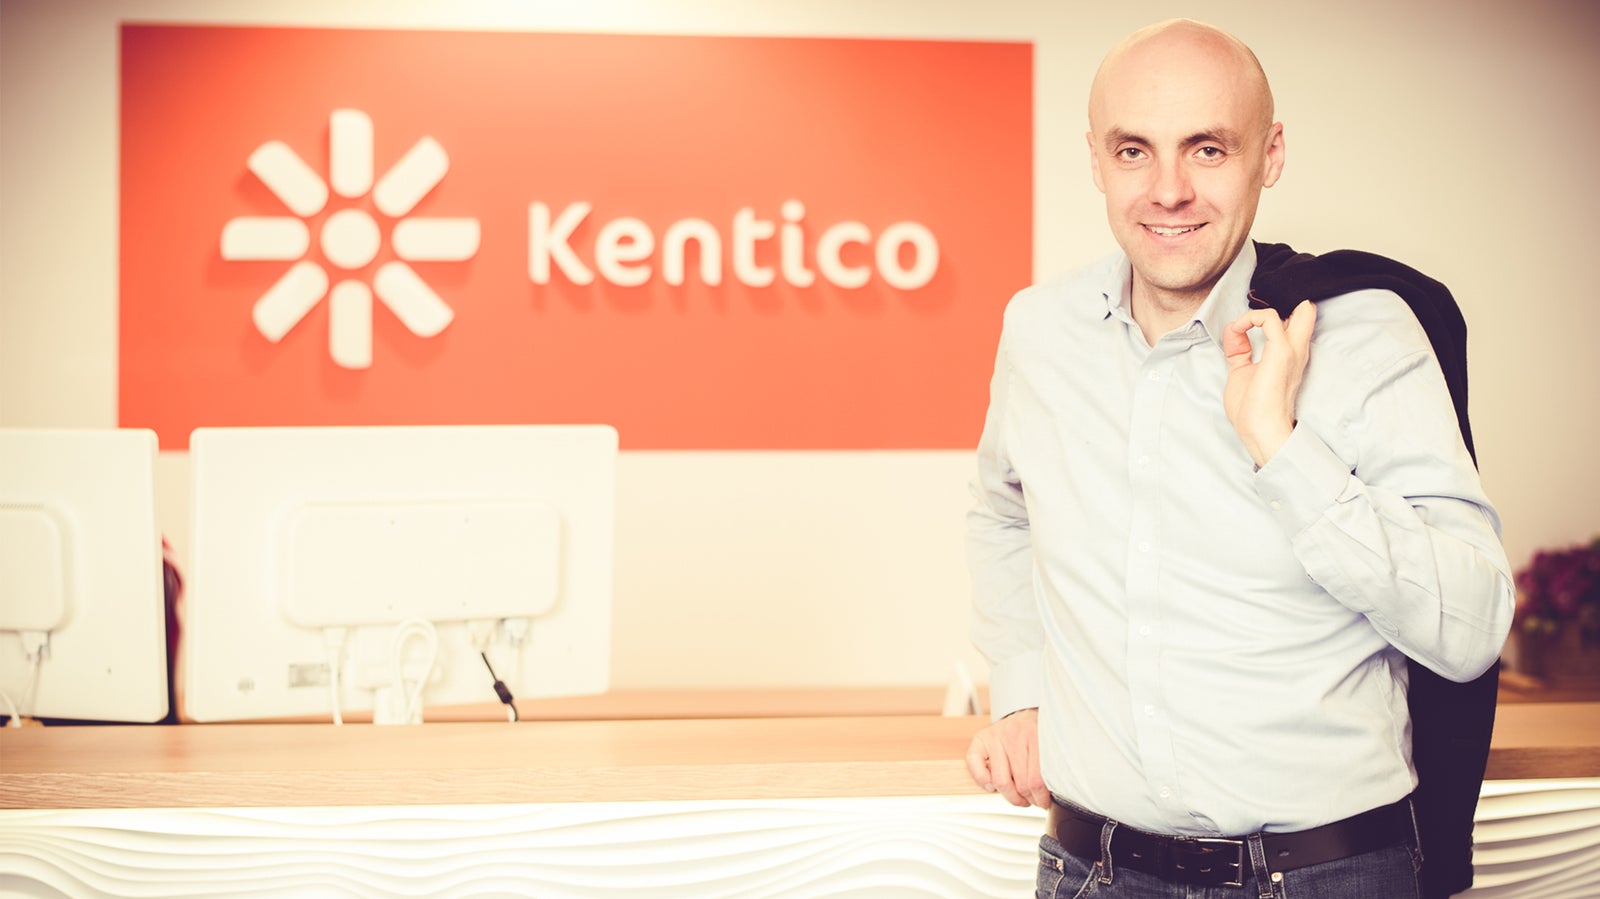 Around the Kentico world in 15 years and 15 questions